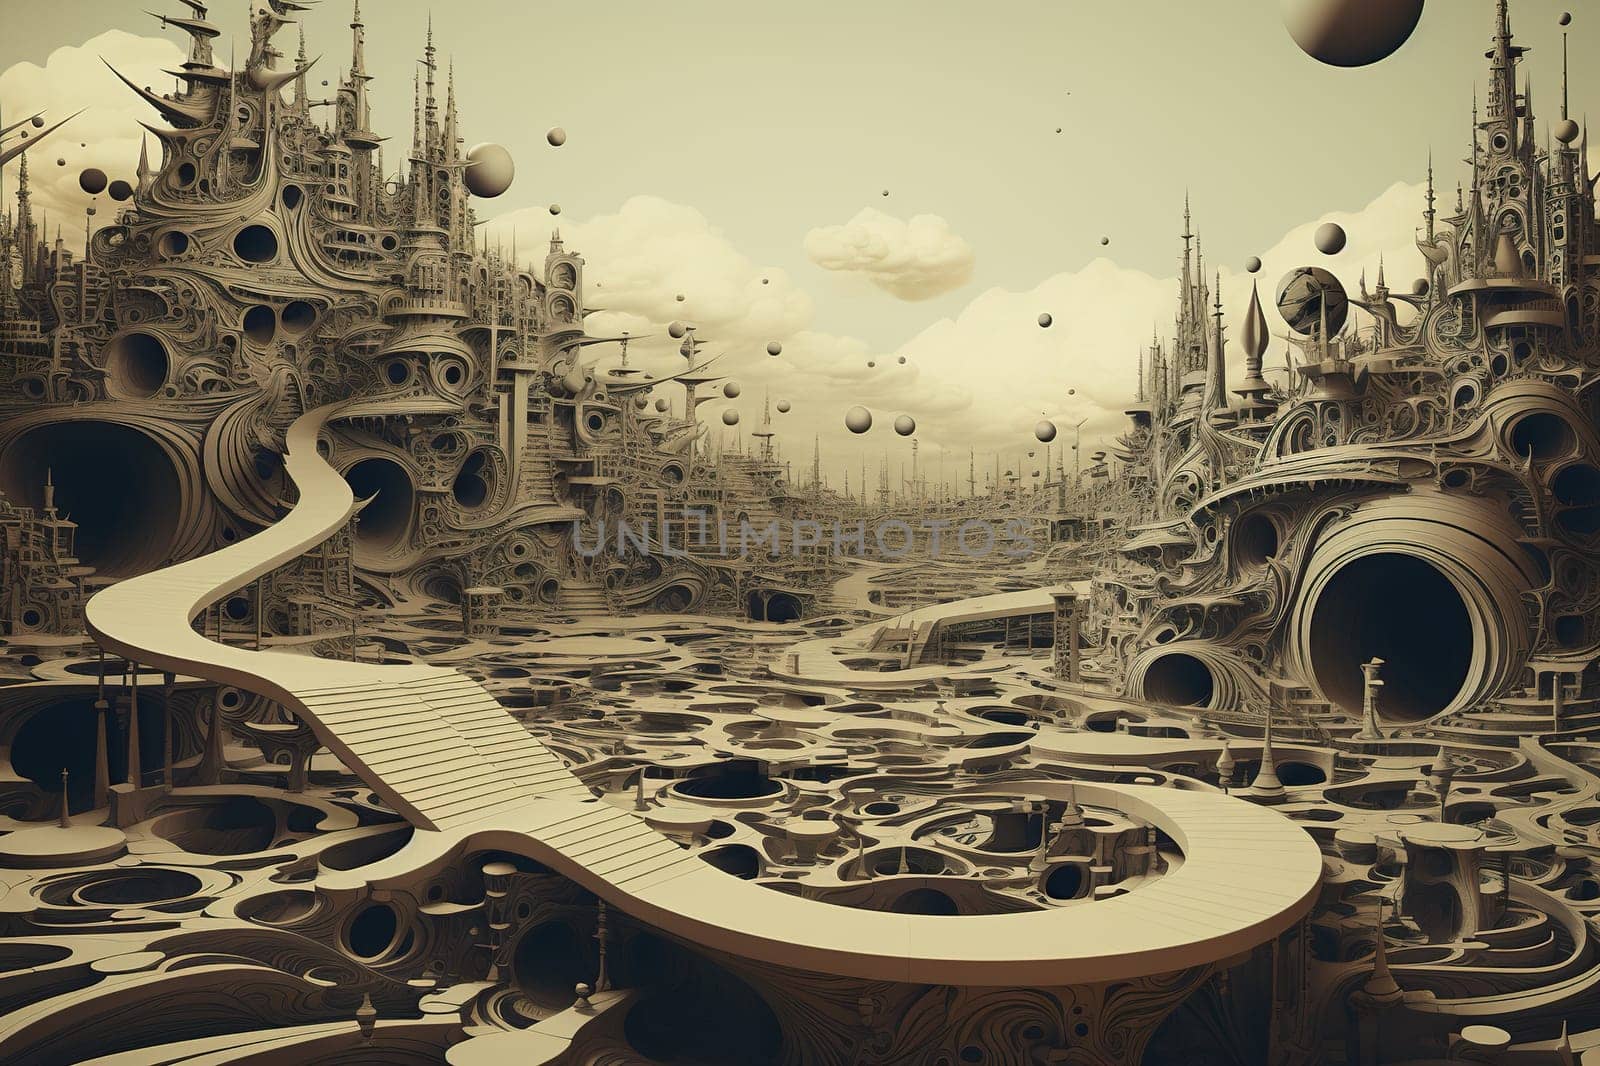 Fantastic futuristic view from an alien planet with unusual architecture of buildings.